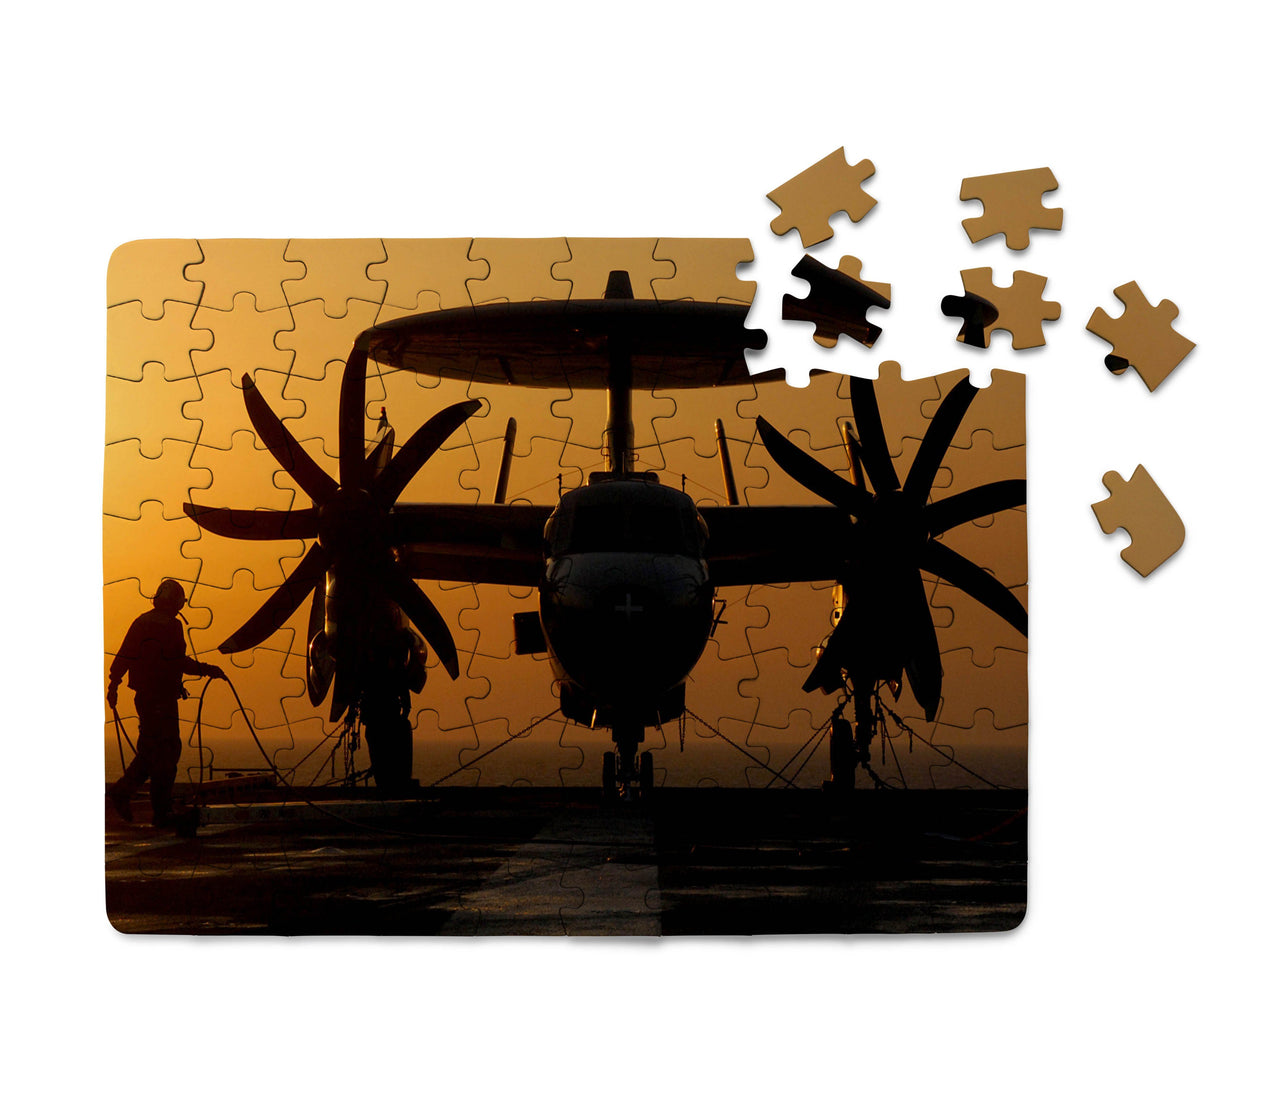 Military Plane at Sunset Printed Puzzles Aviation Shop 